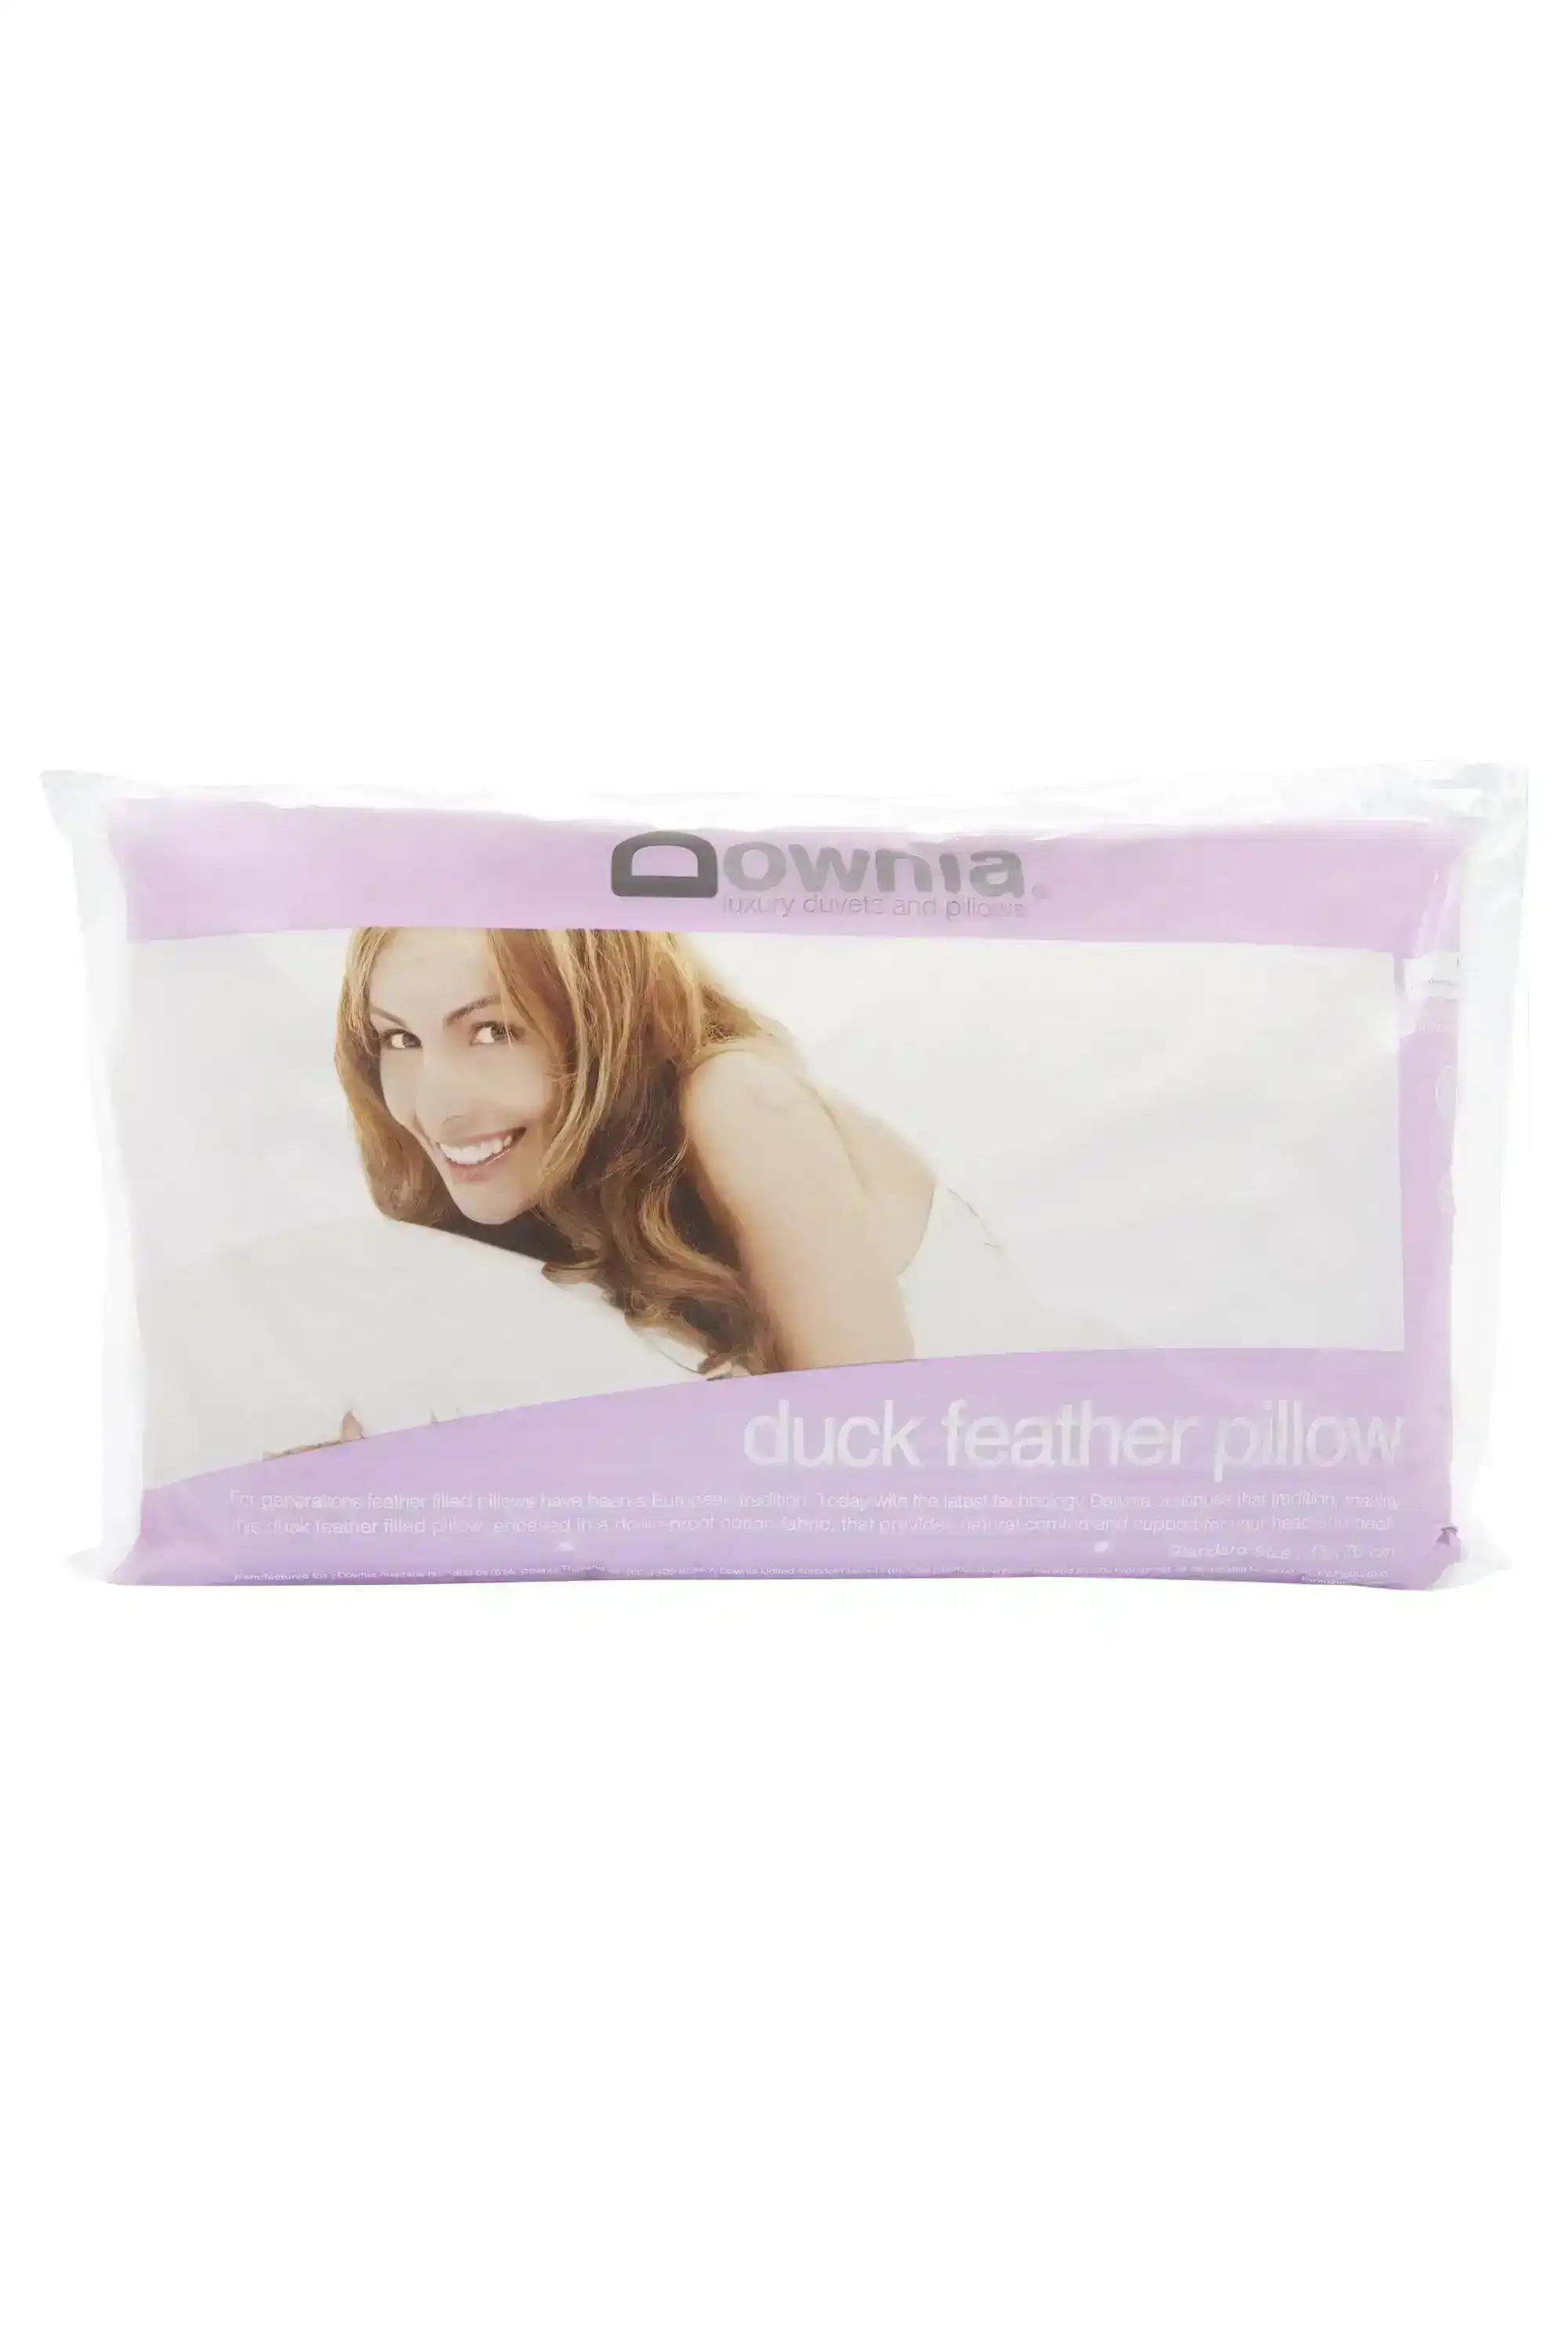 Downia DUCK FEATHER PILLOW - Firm